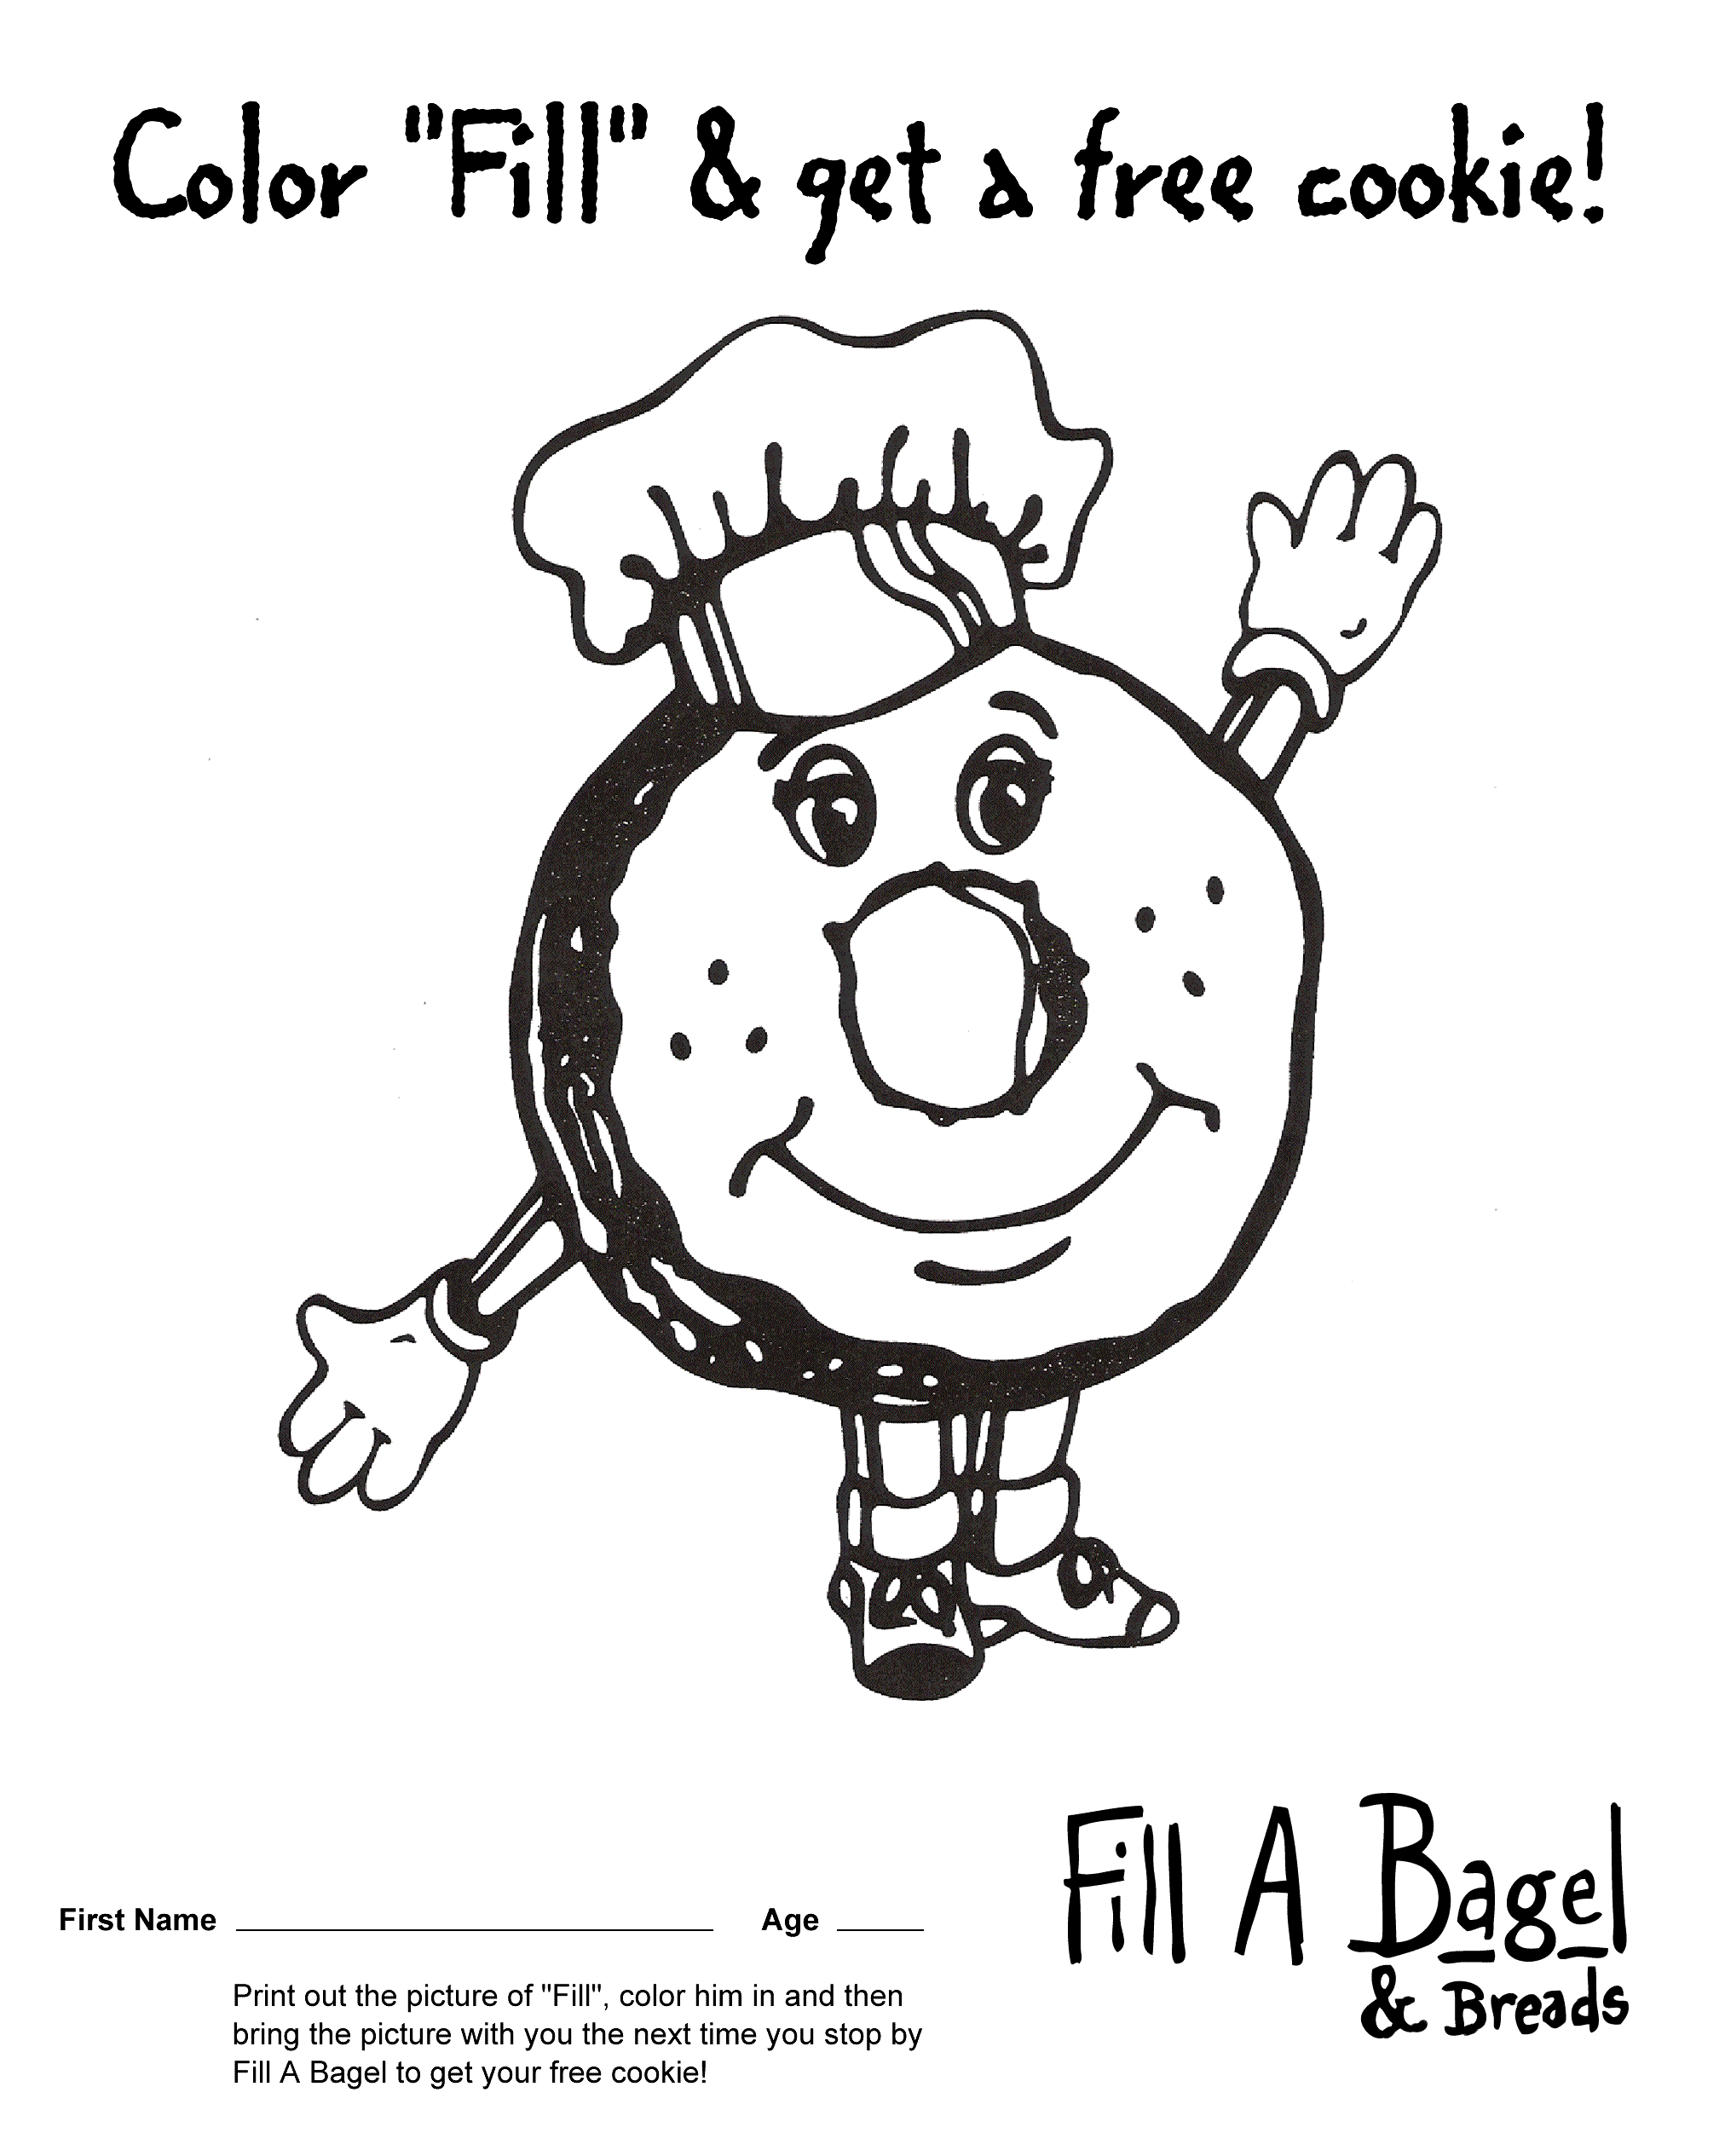 Fill A Bagel & Breads | Color "Fill"